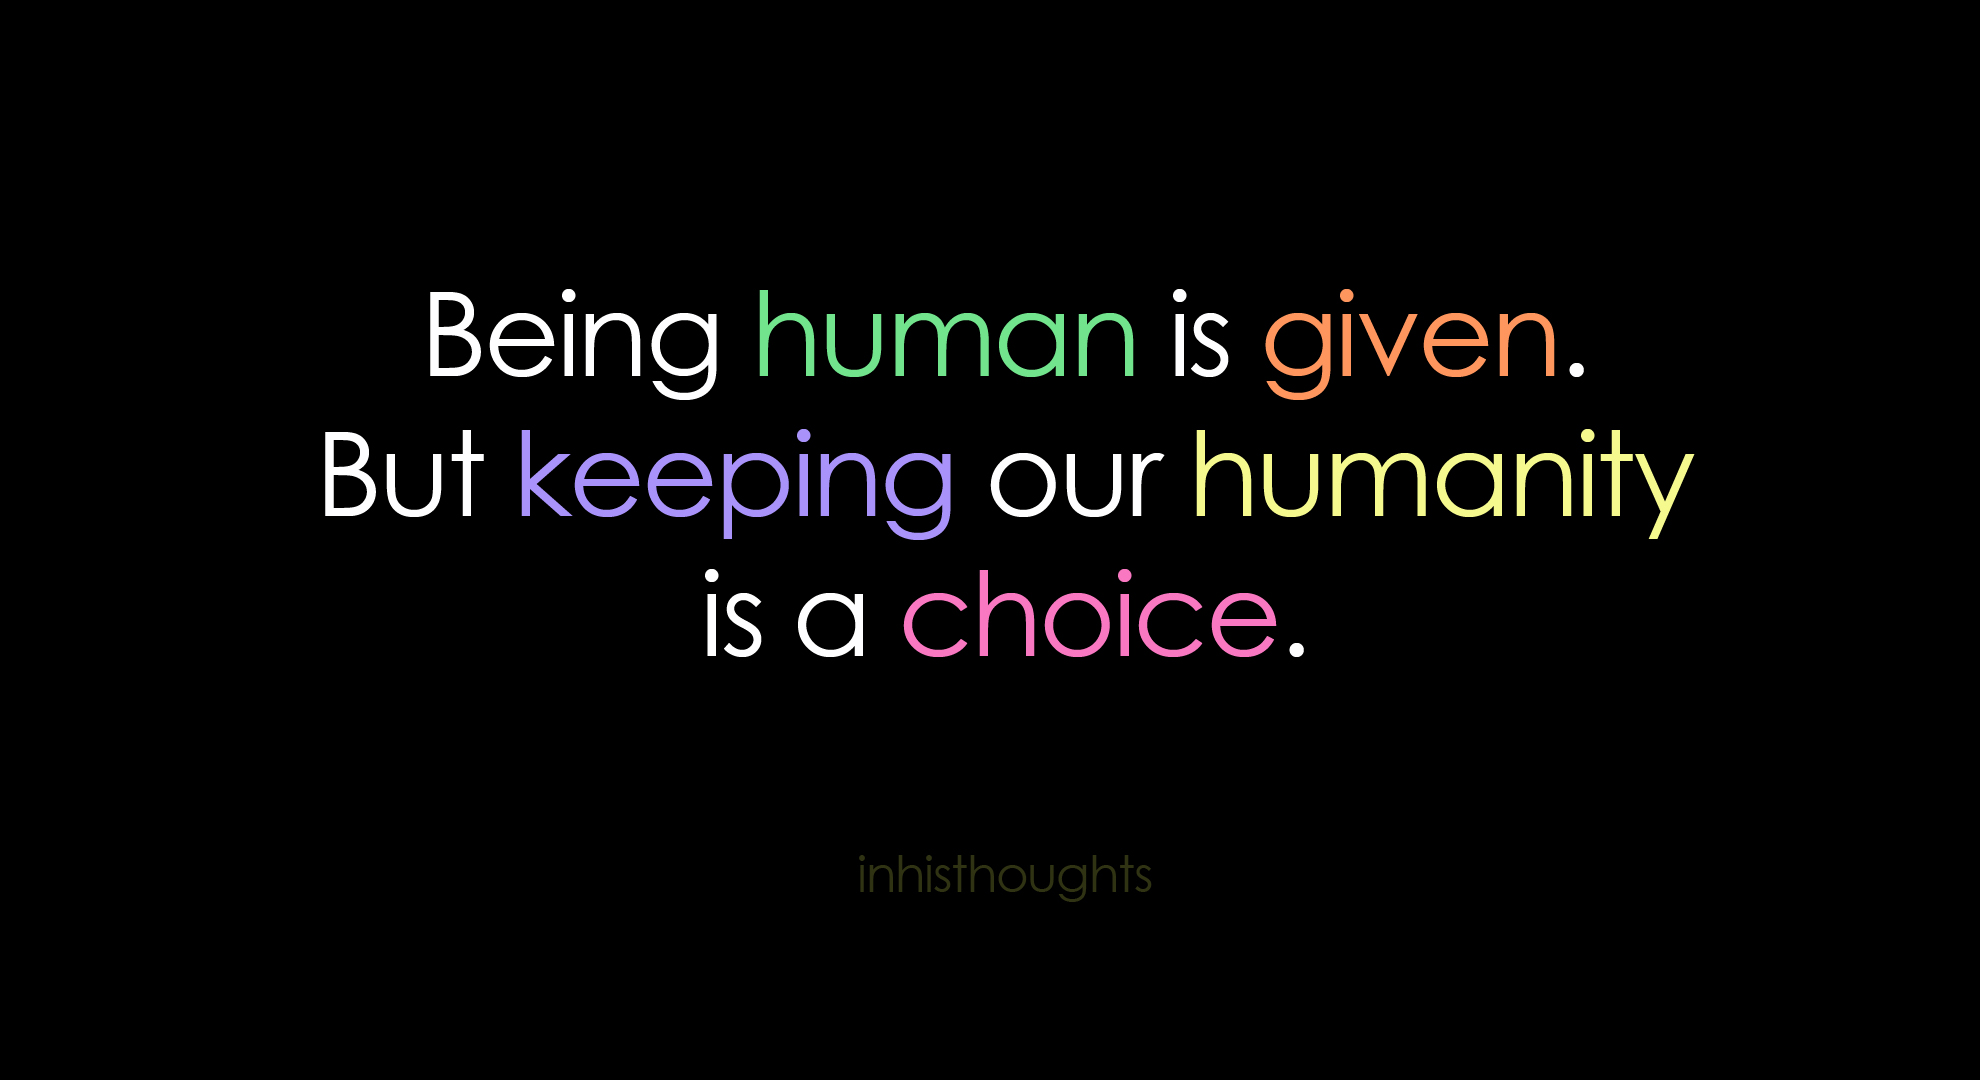 Being human is given but keeping our humanity is a choice